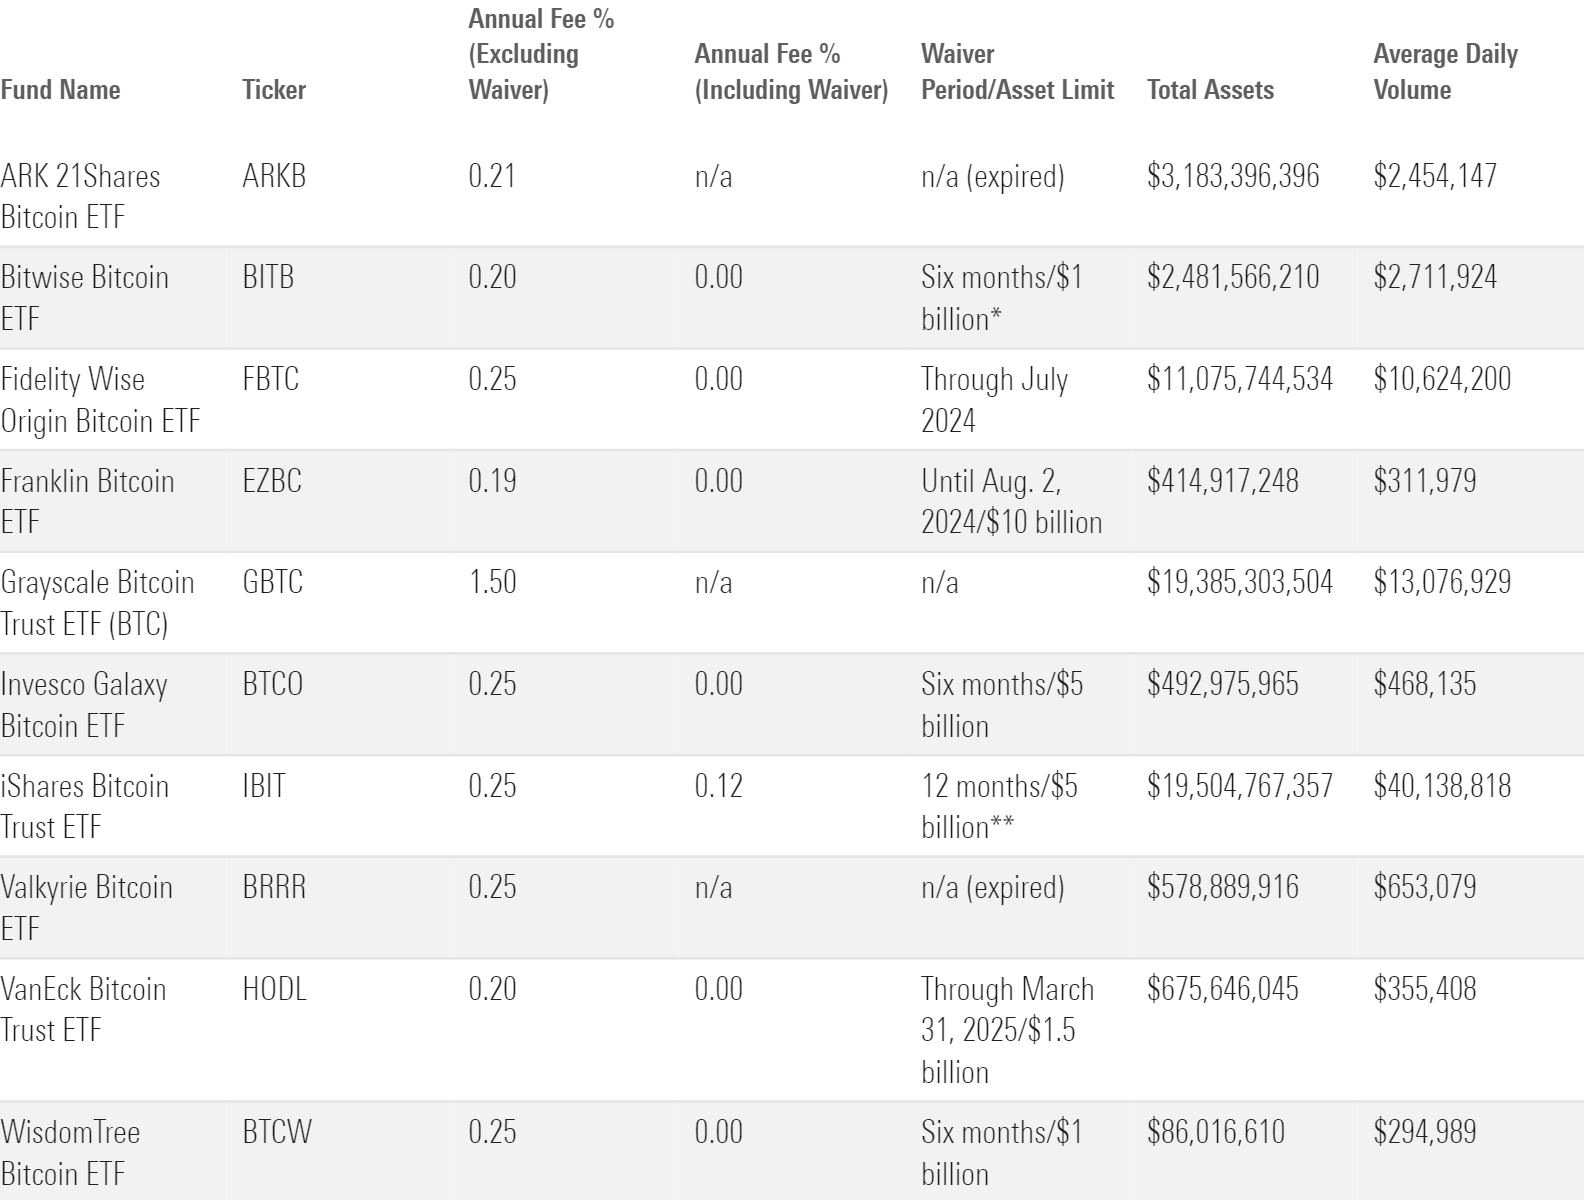 A table showing fees and other key data for bitcoin ETFs.